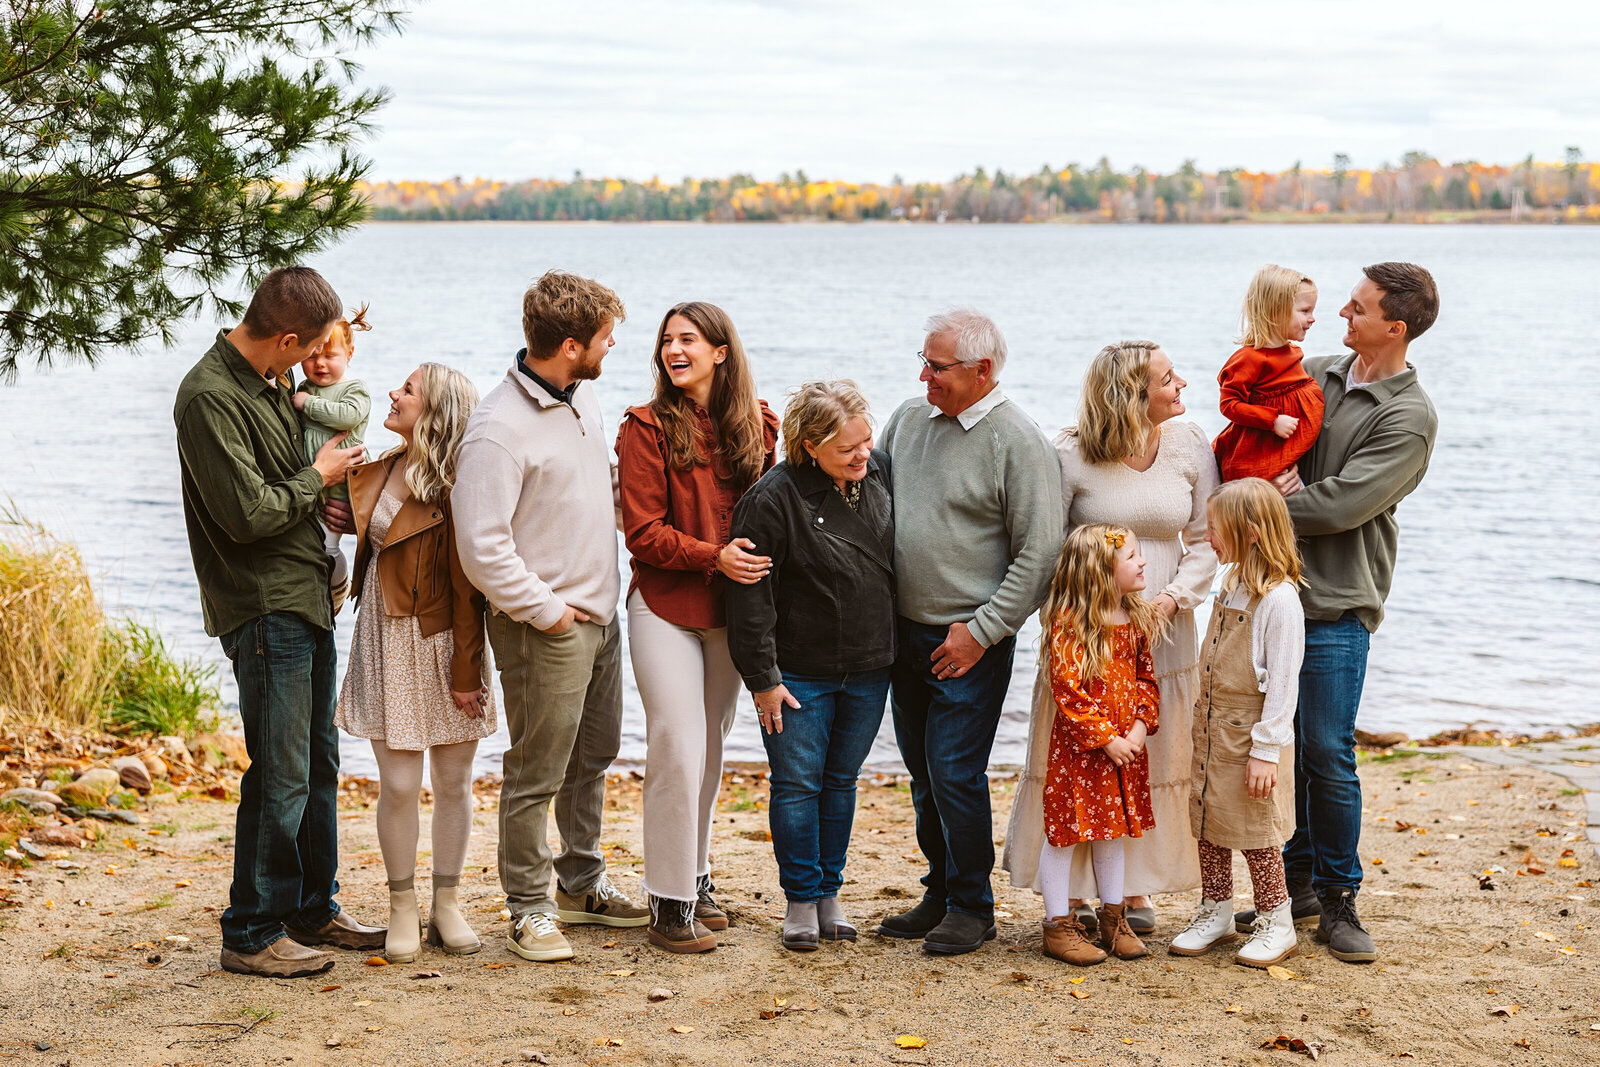 Extended family members smiling at each other - Park Rapids, Minnesota